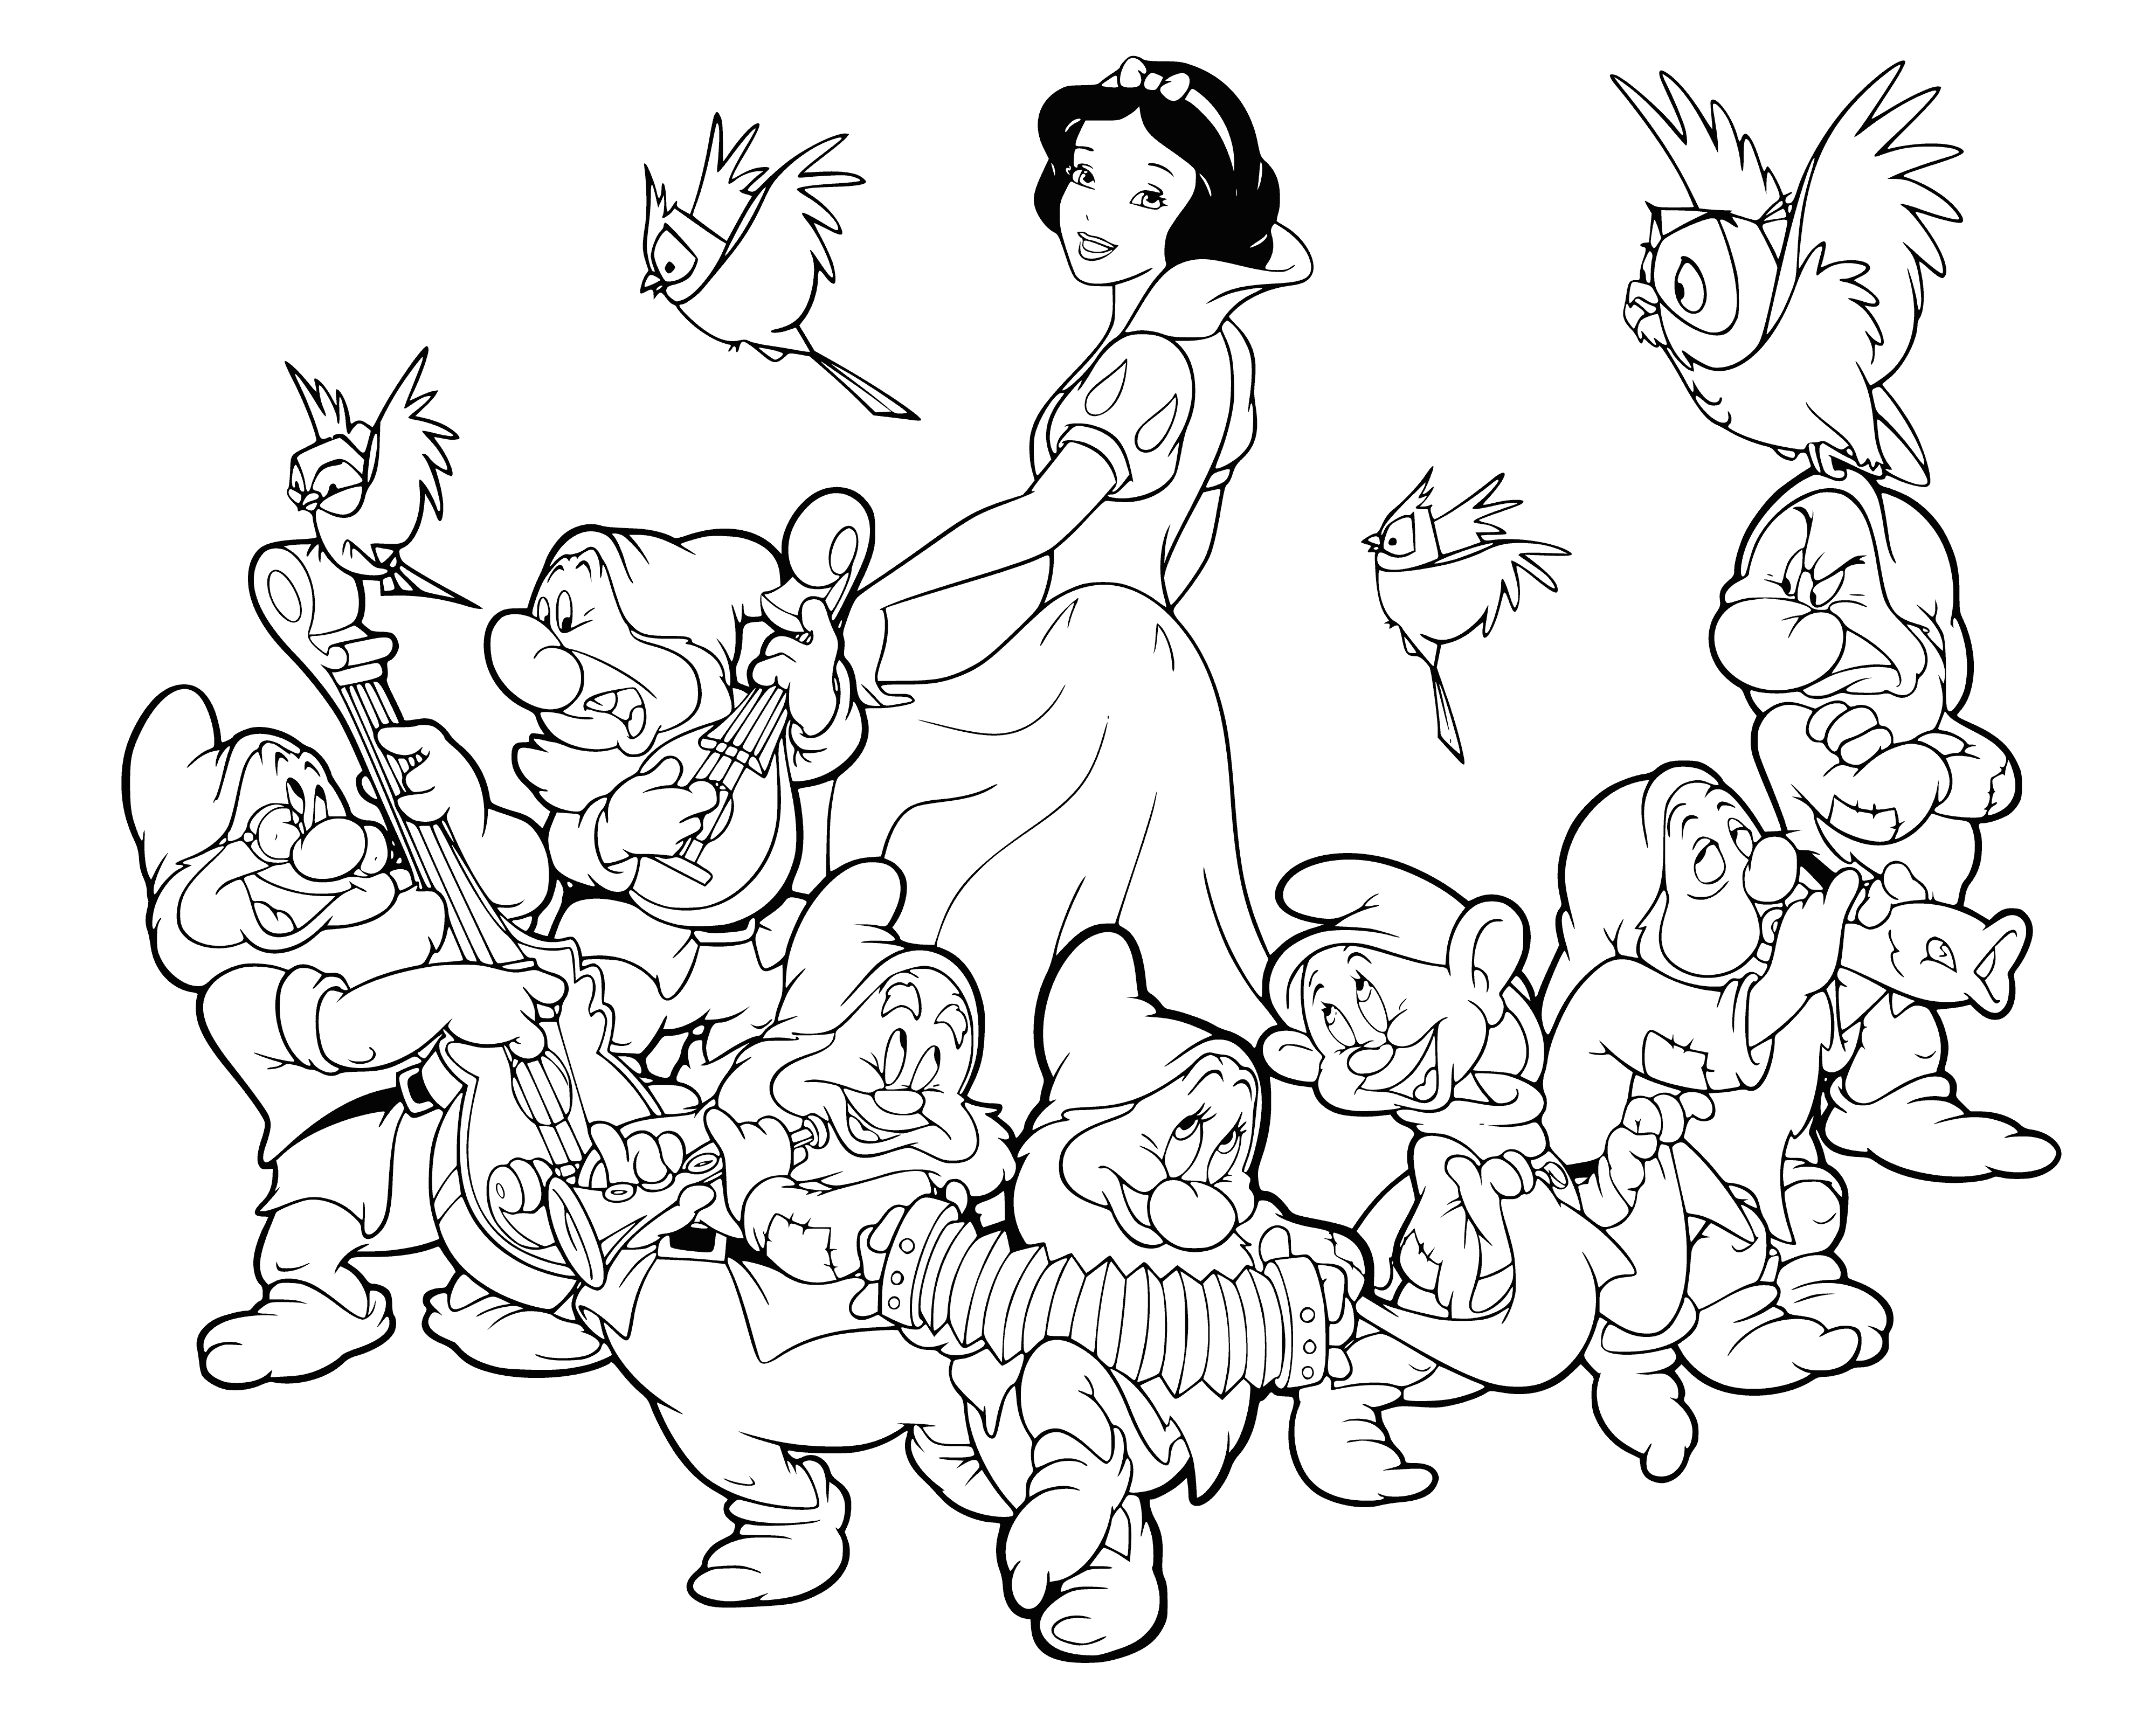 Snow White and the Seven Dwarfs coloring page